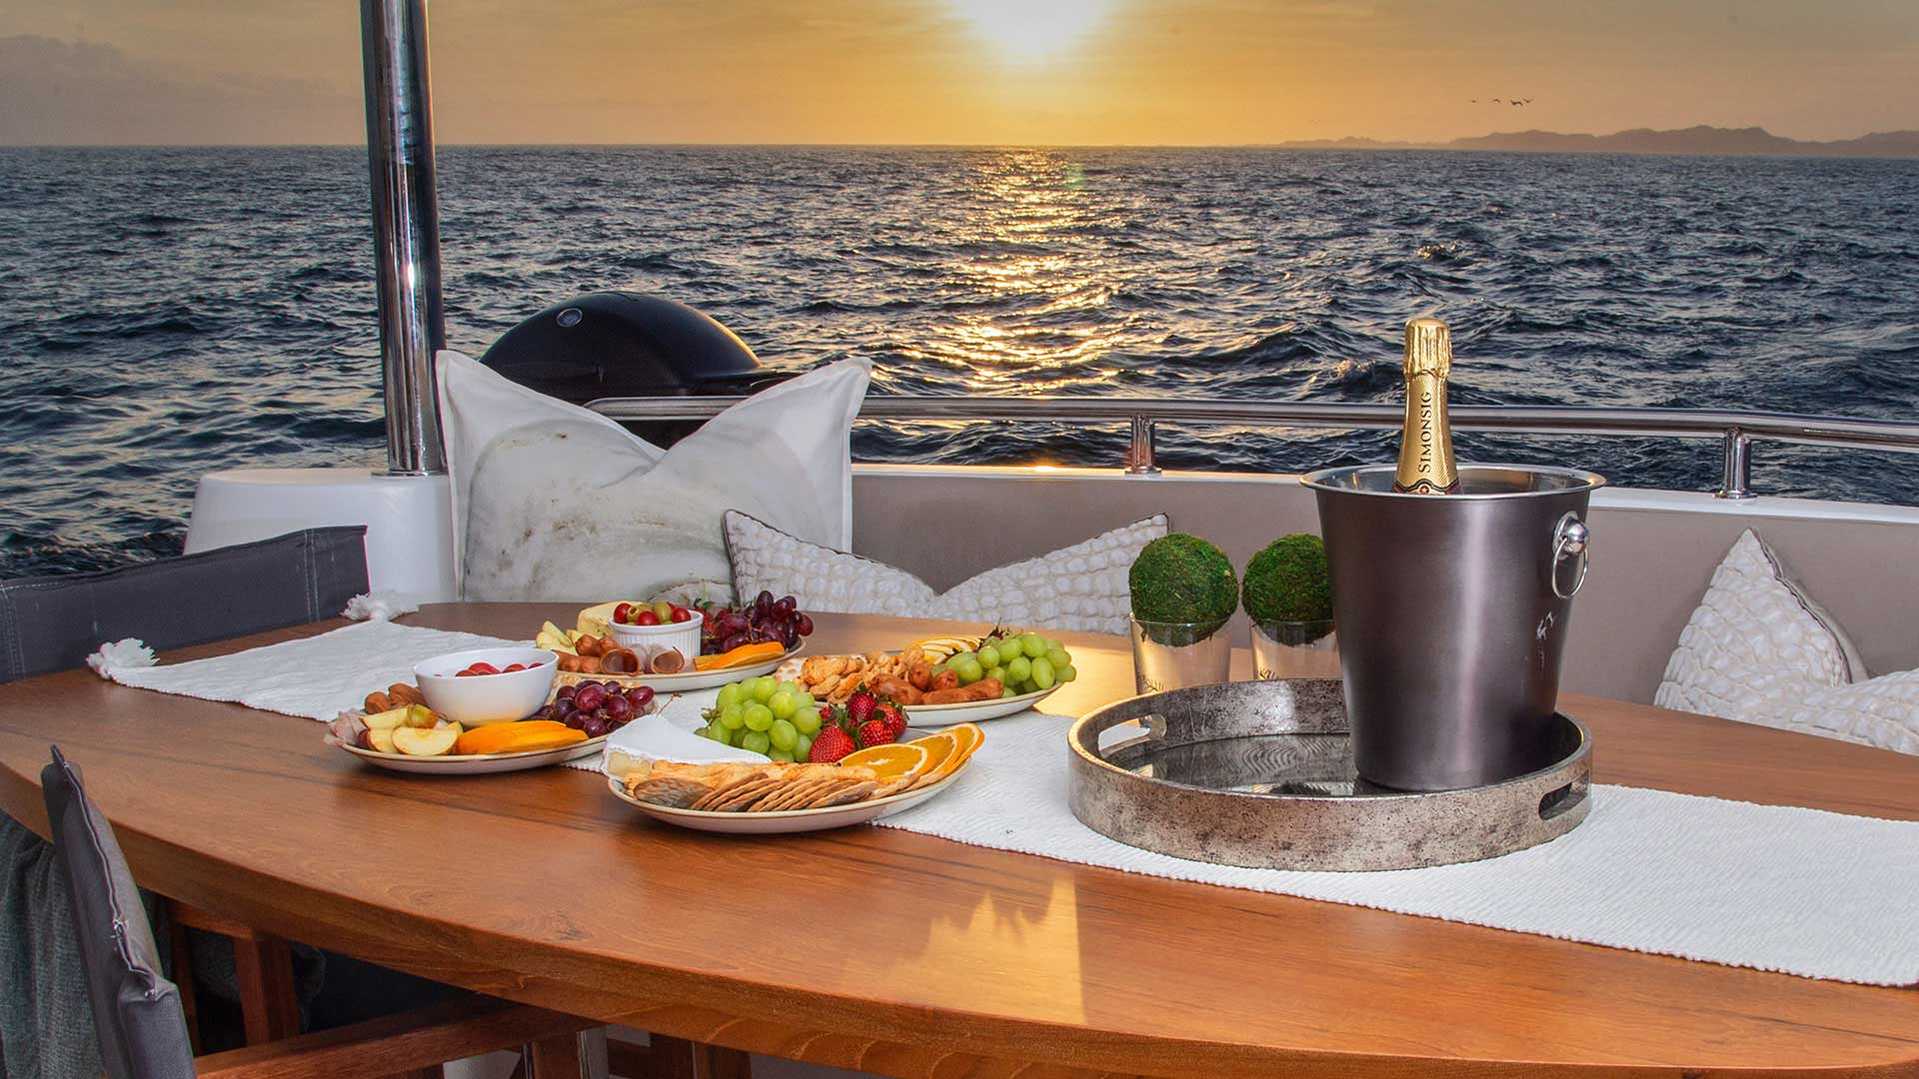  6 TOP Tips For Cooking While Cruising | KYC